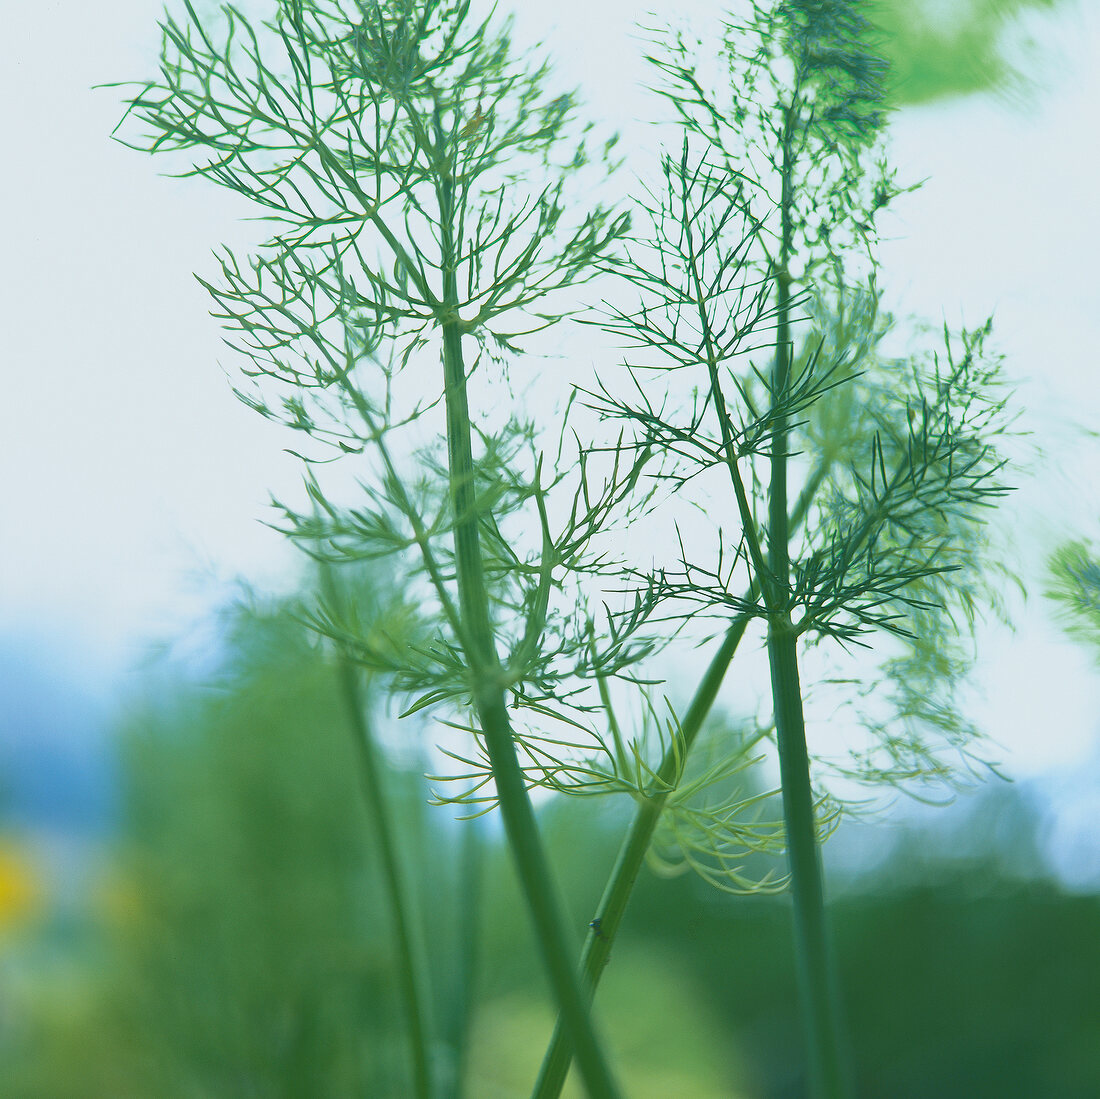 Close-up of dill leaves